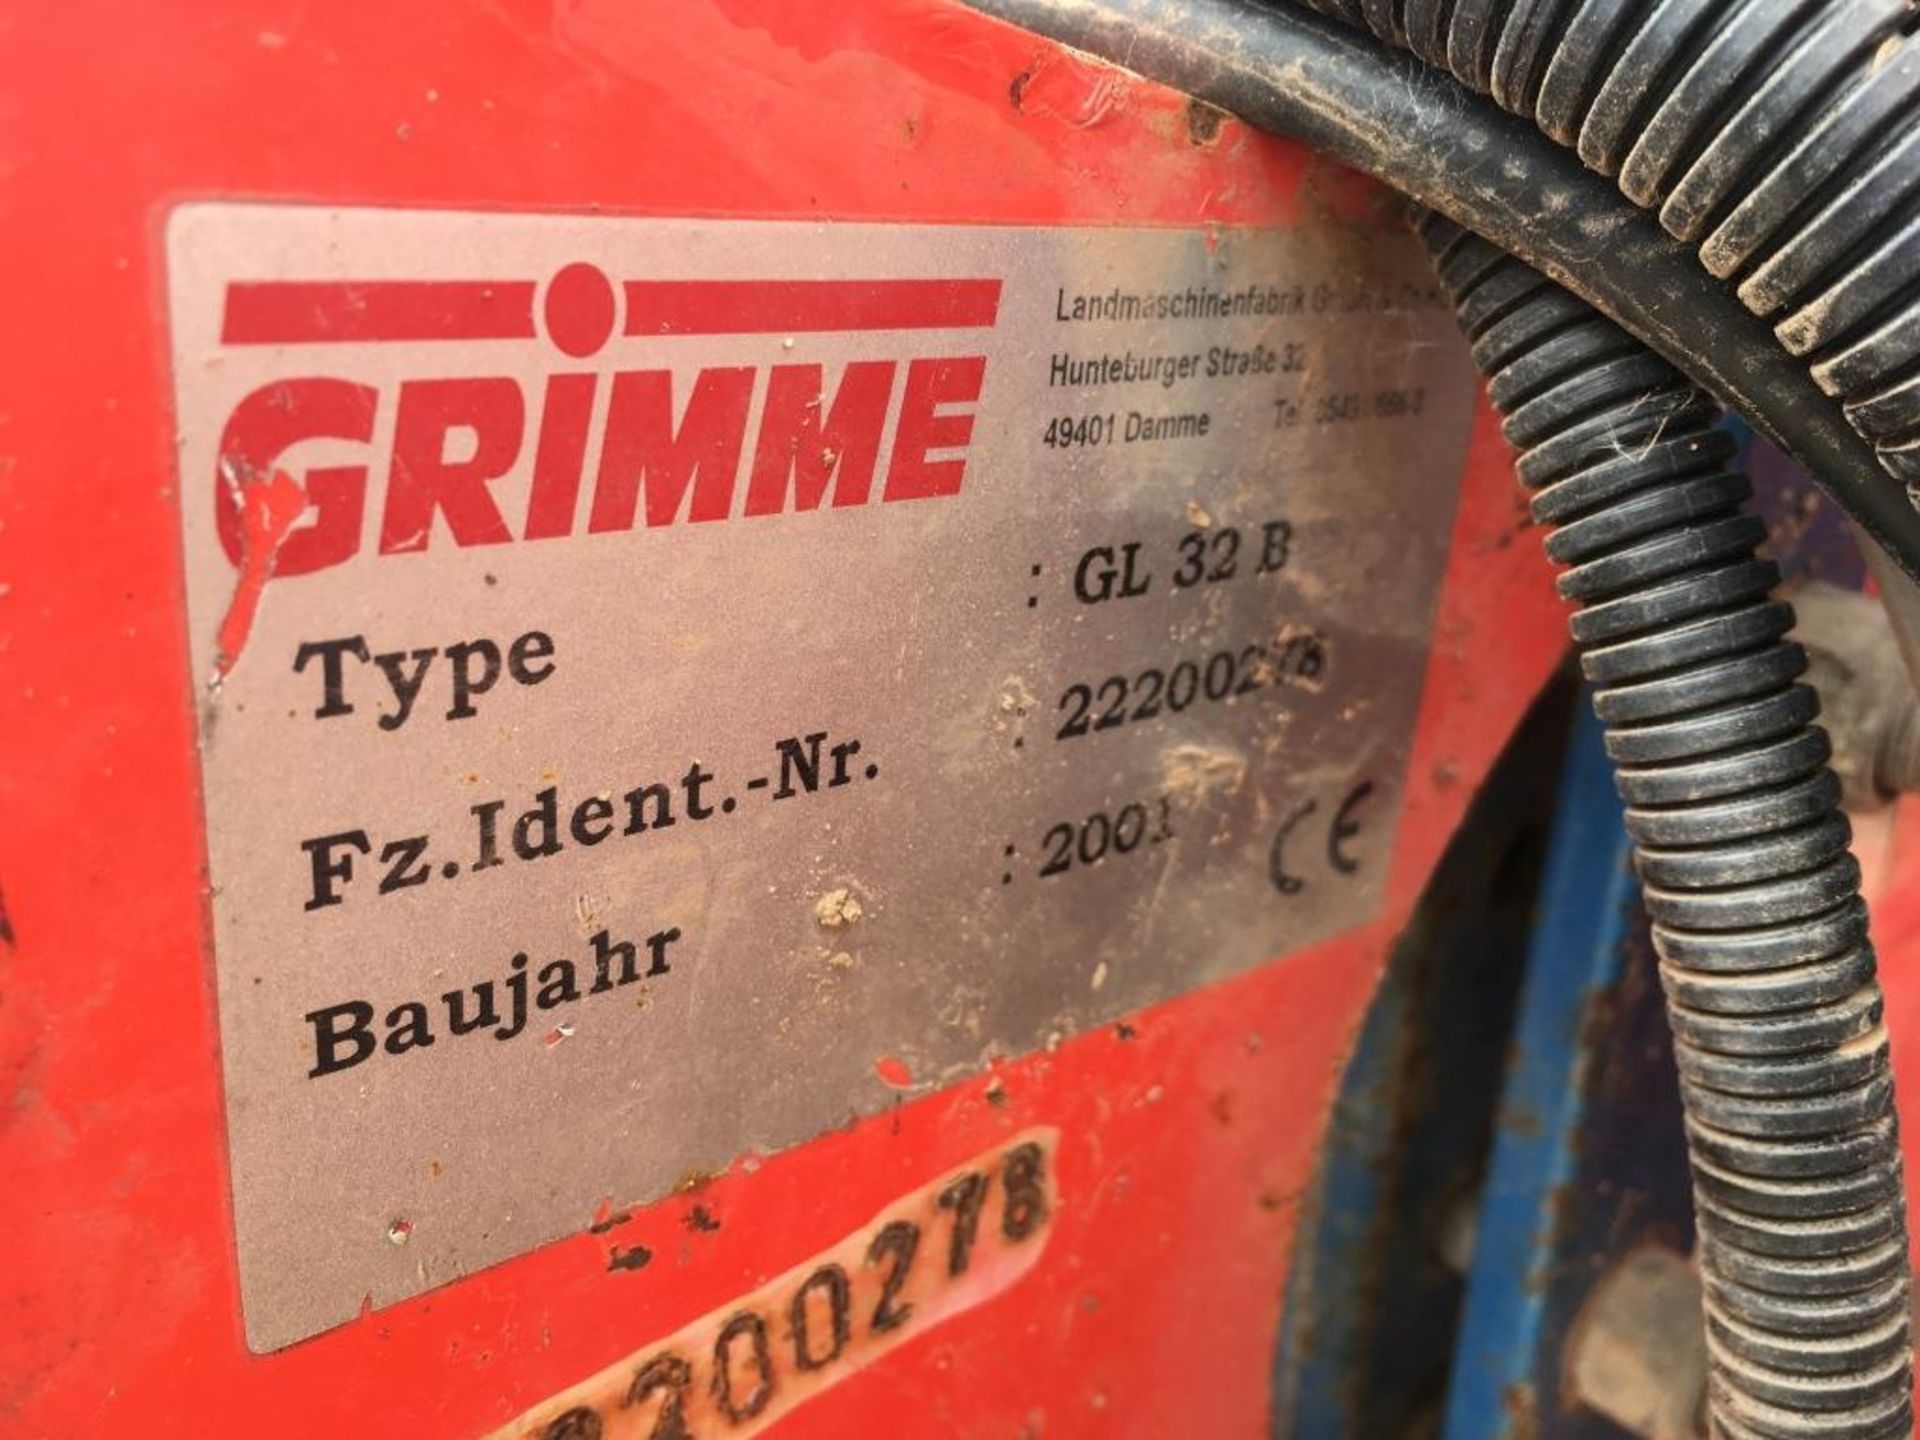 Grimme GL32B potato planter serial number: 22200278 (2001) (missing guarding) - Image 6 of 8